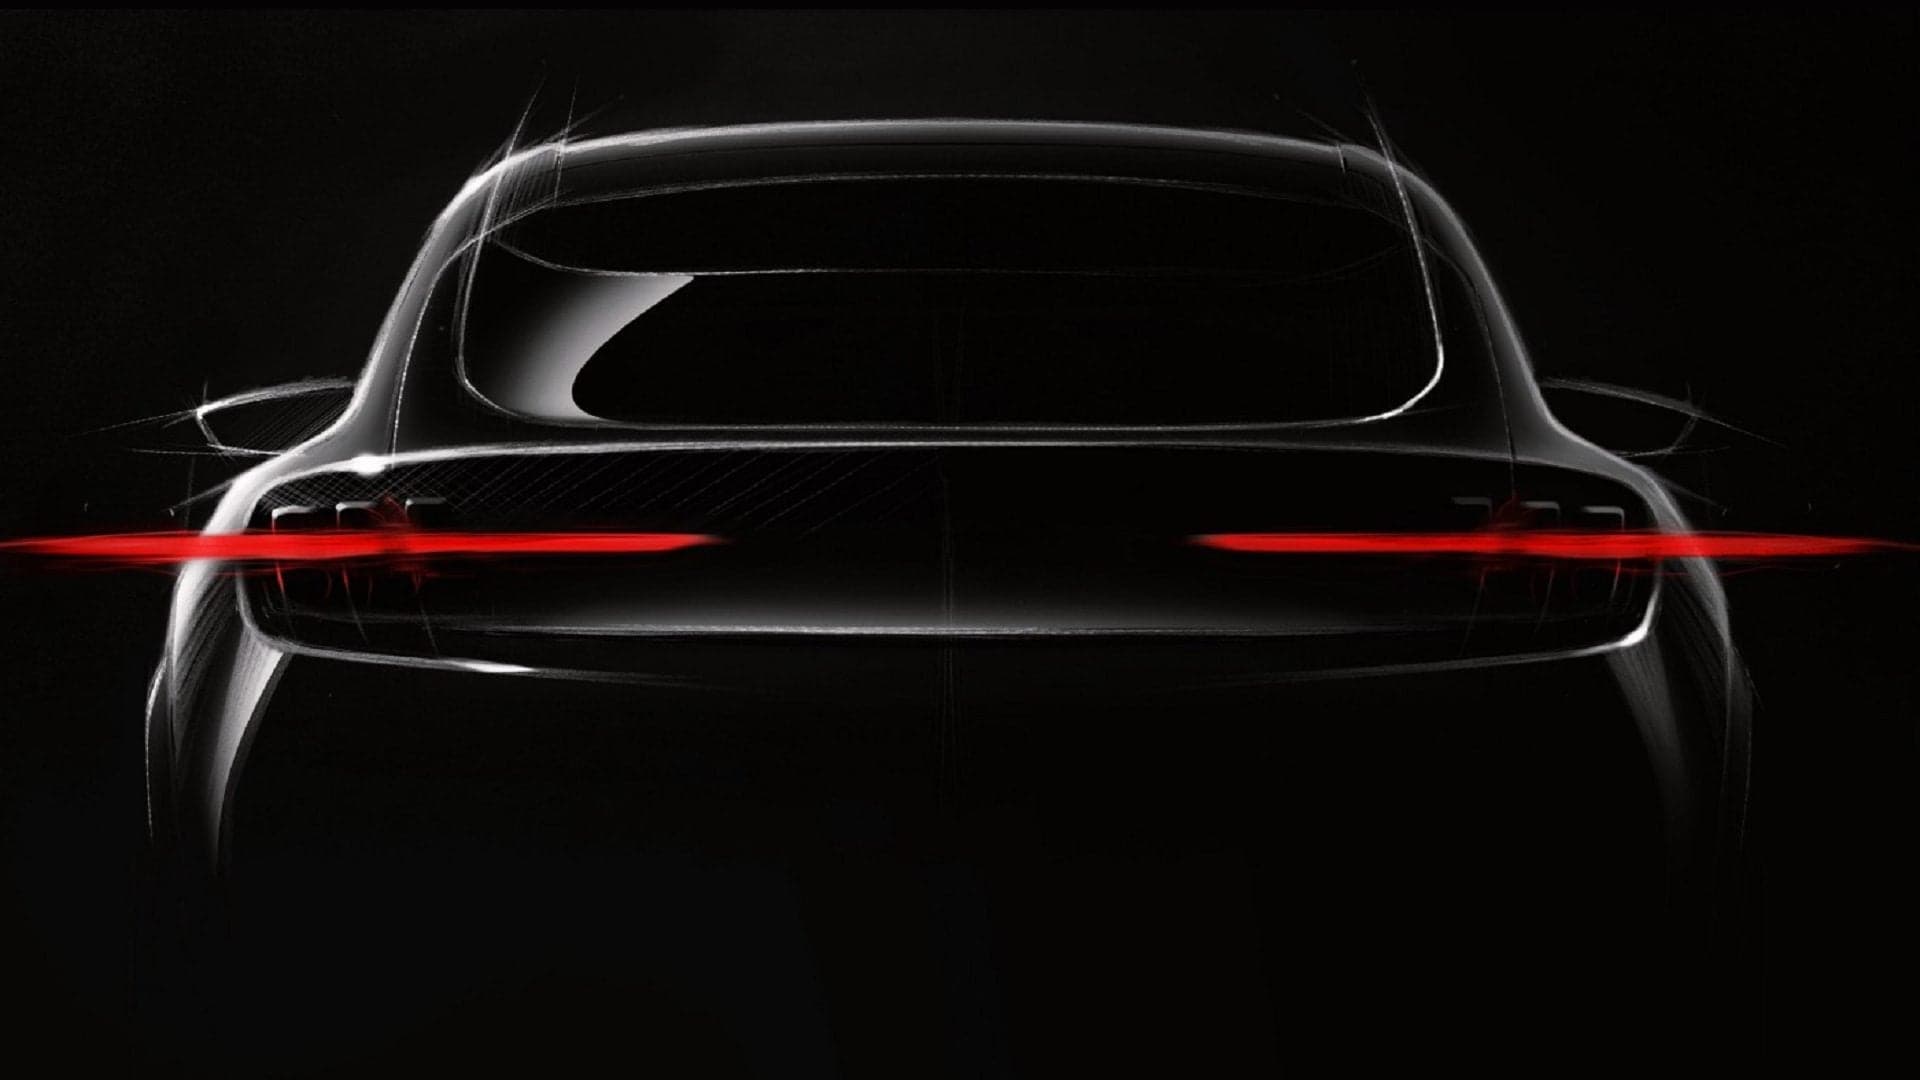 Ford Teases Mustang-Inspired Electric Crossover, Claims 300-Mile Range